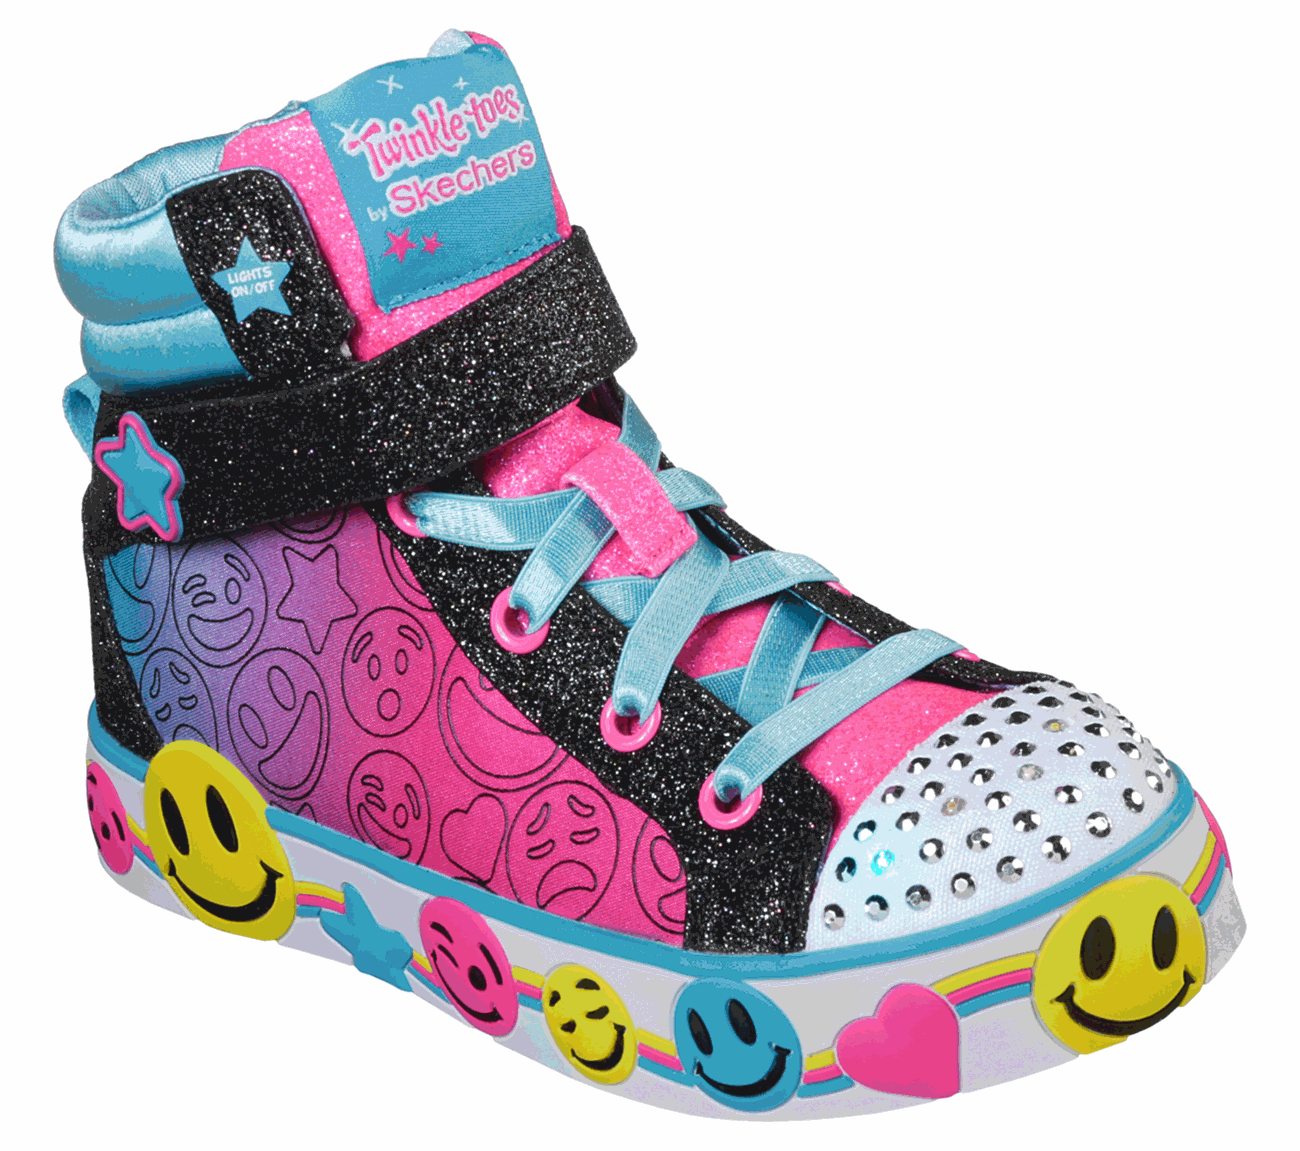 skechers smiley face shoes